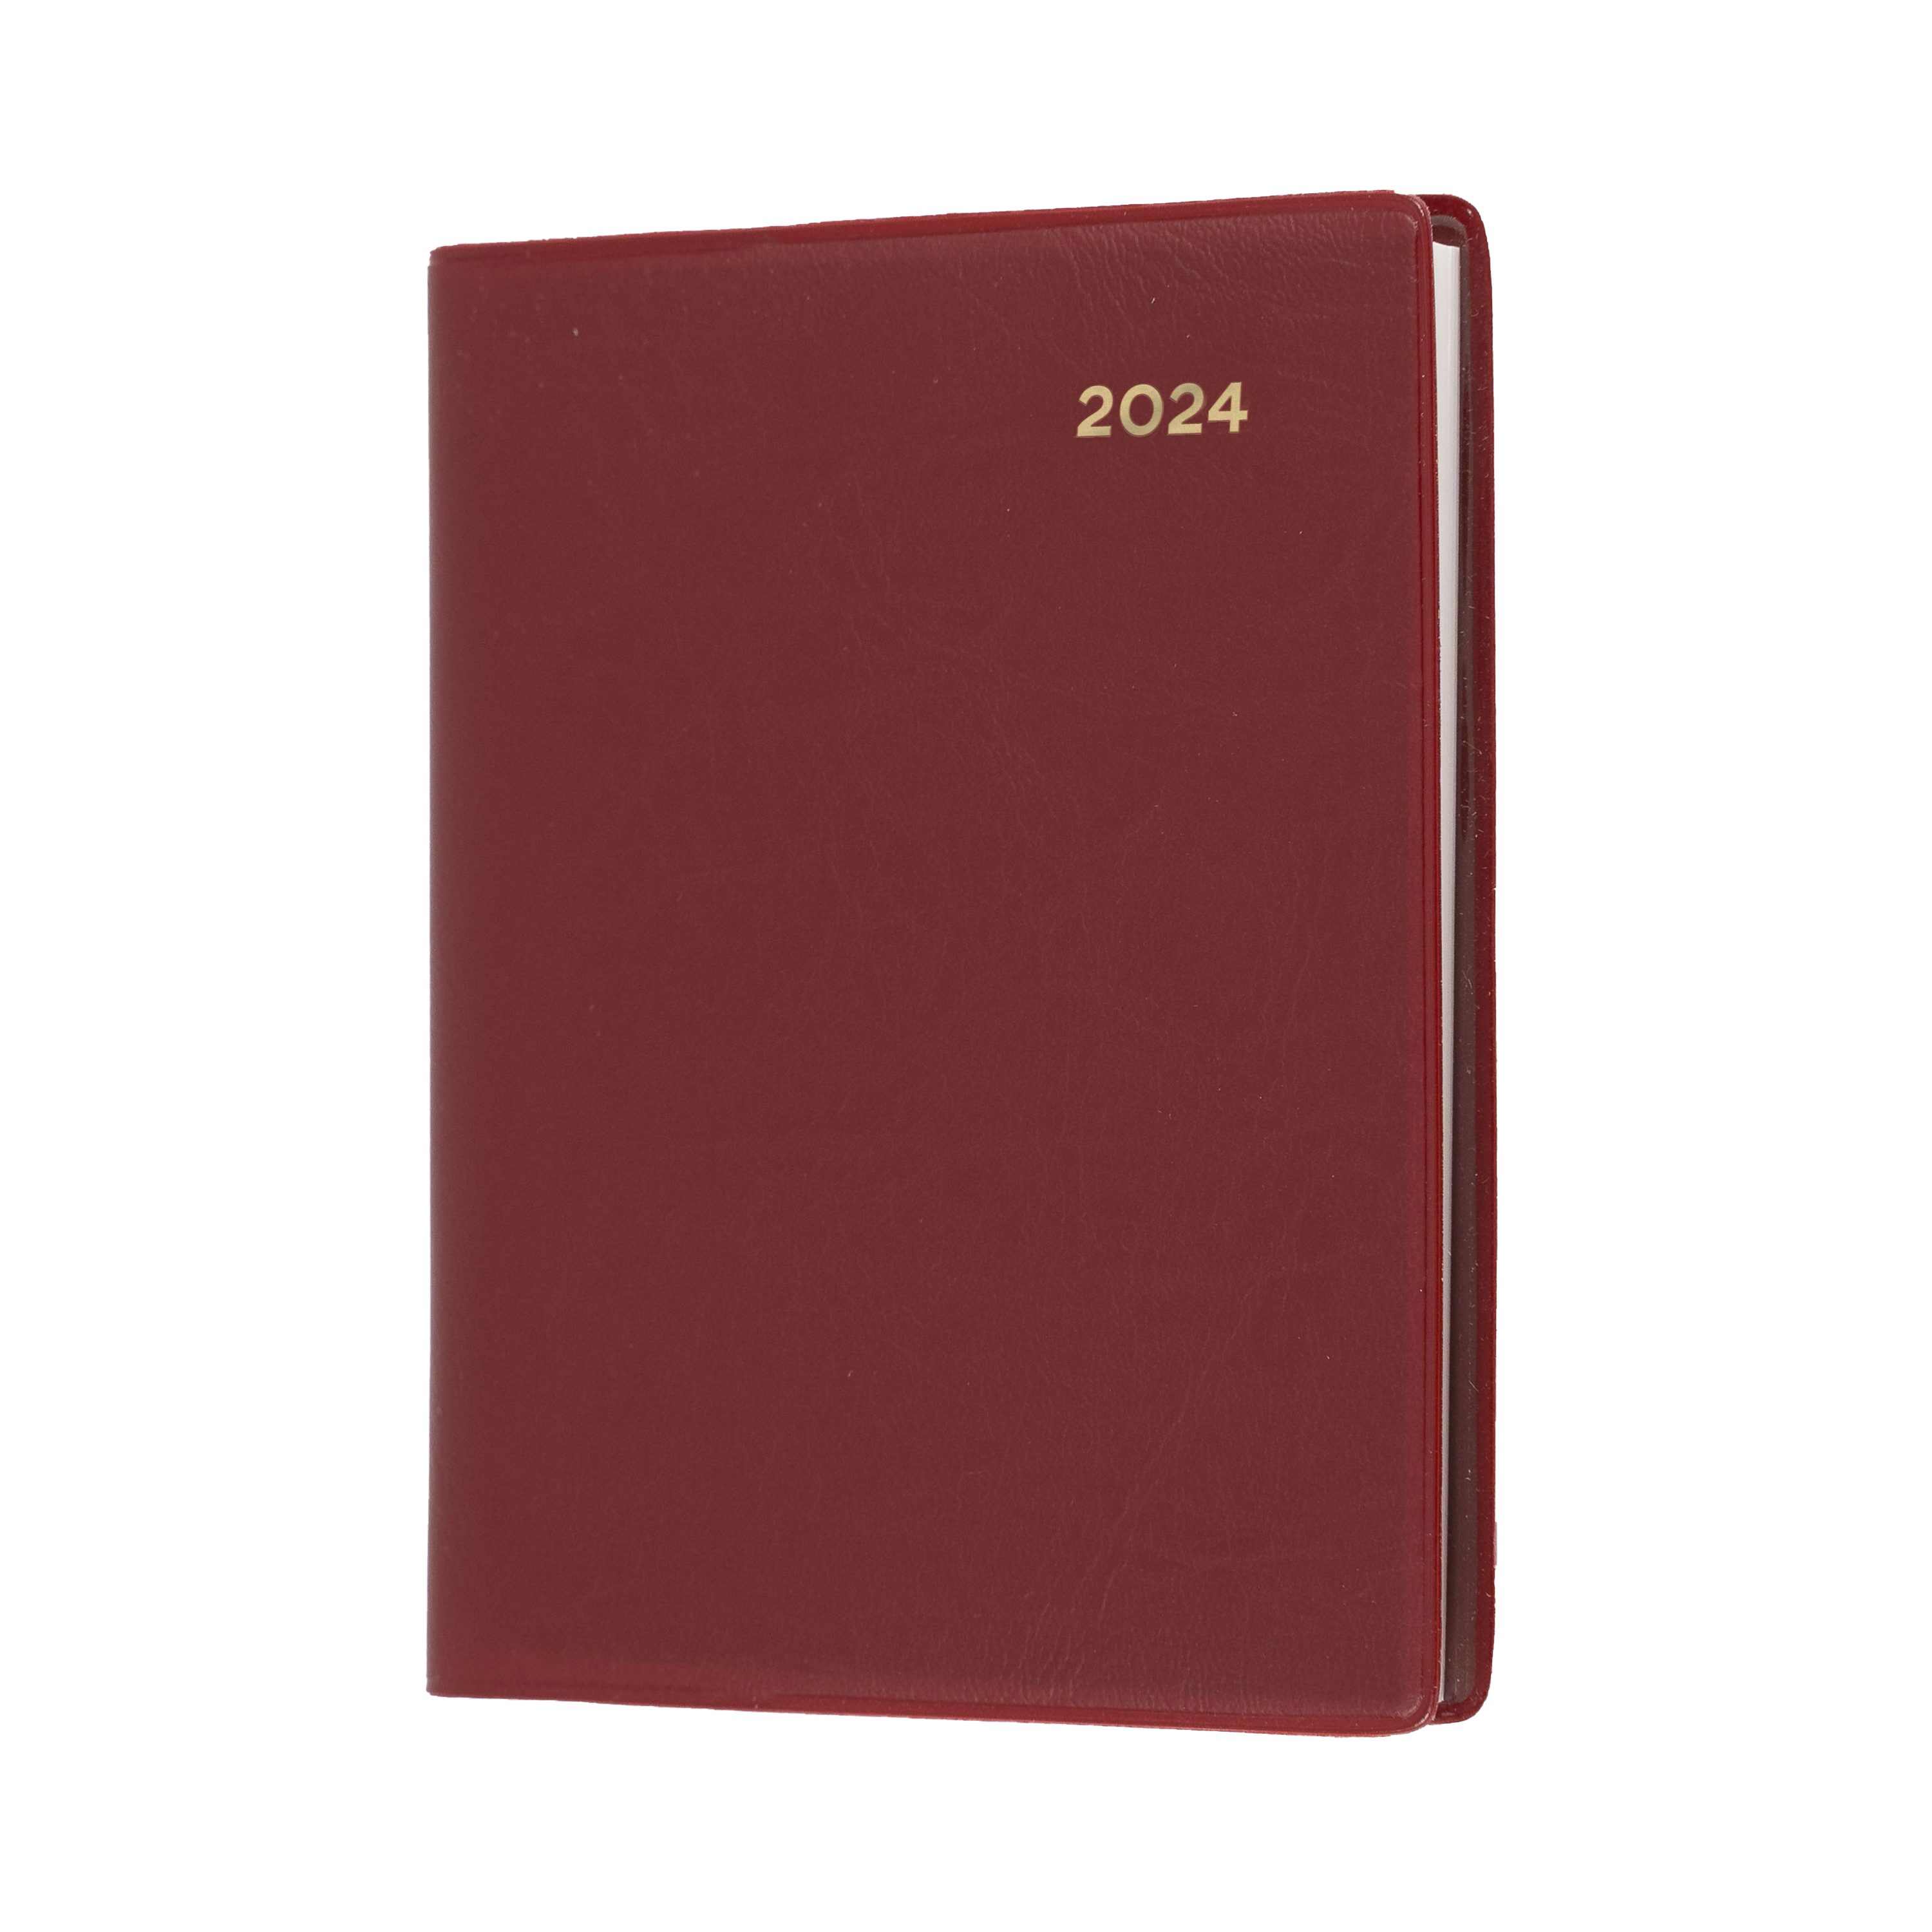 Belmont Pocket 2024 Diary - Week to View, Size A7 Burgundy / A7 (105 x 74mm)